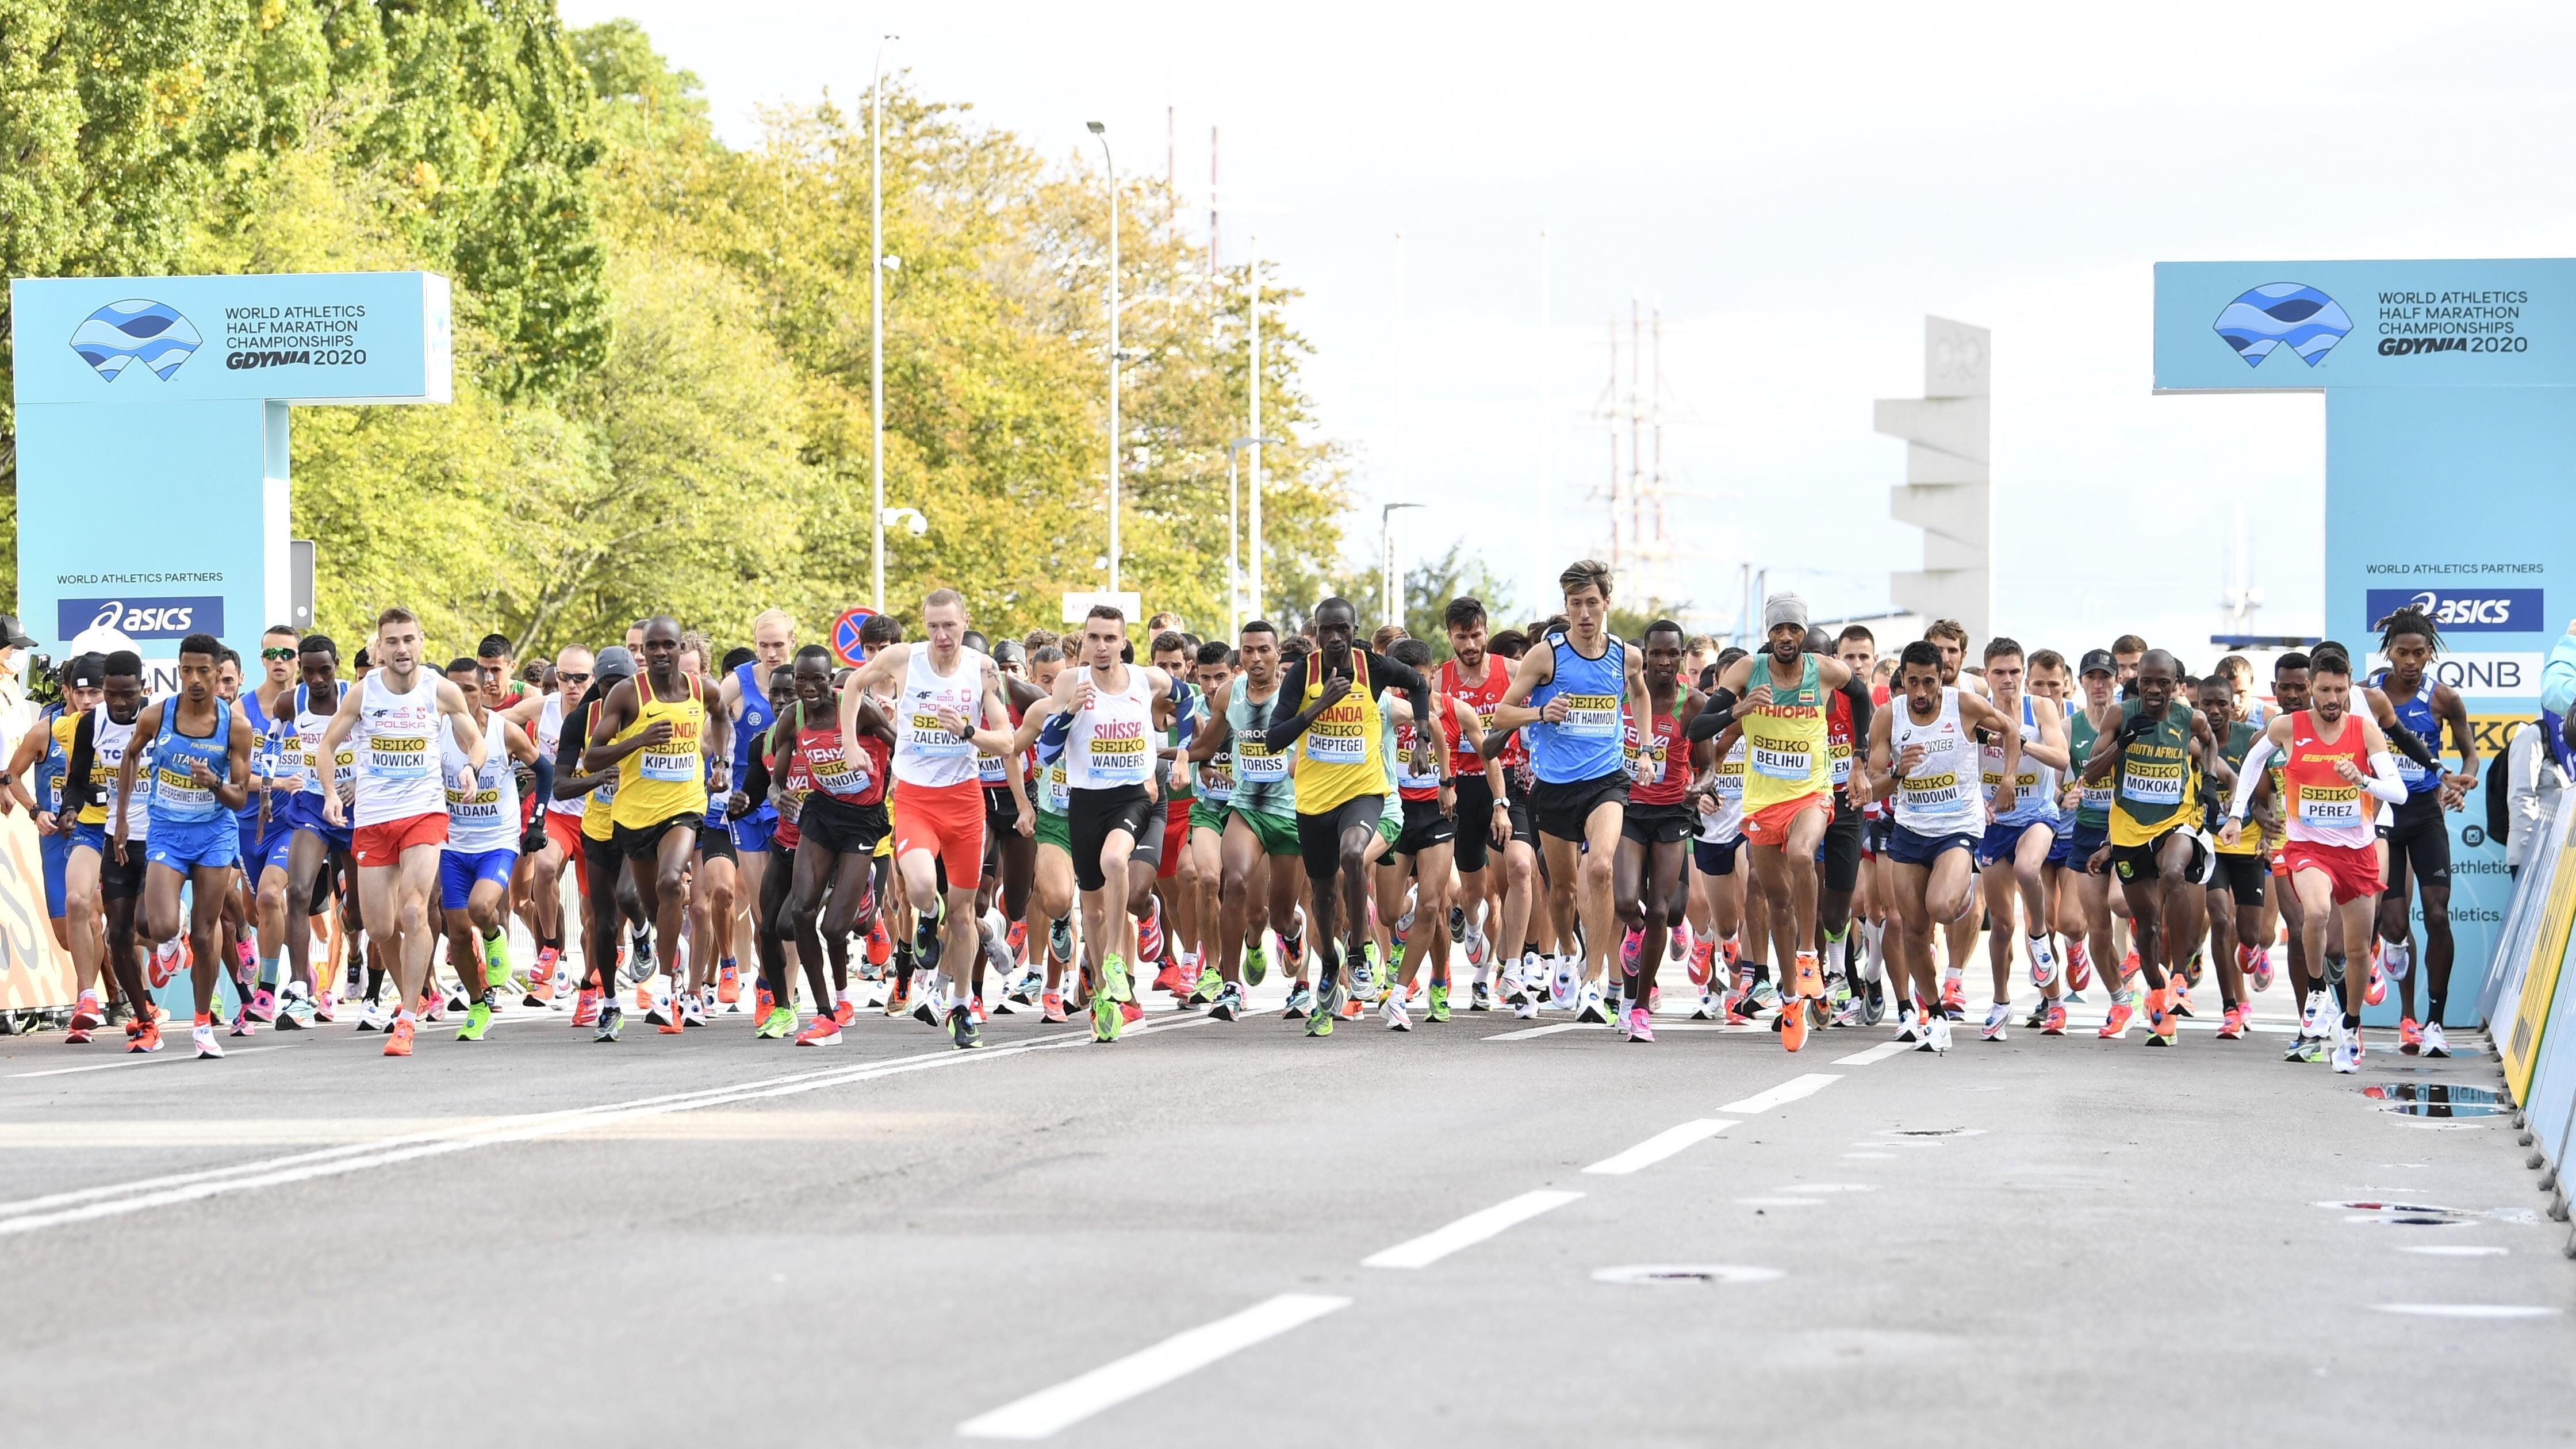 The start of the men's race at the World Athletics Half Marathon Championships Gdynia 2020 (Getty Images)